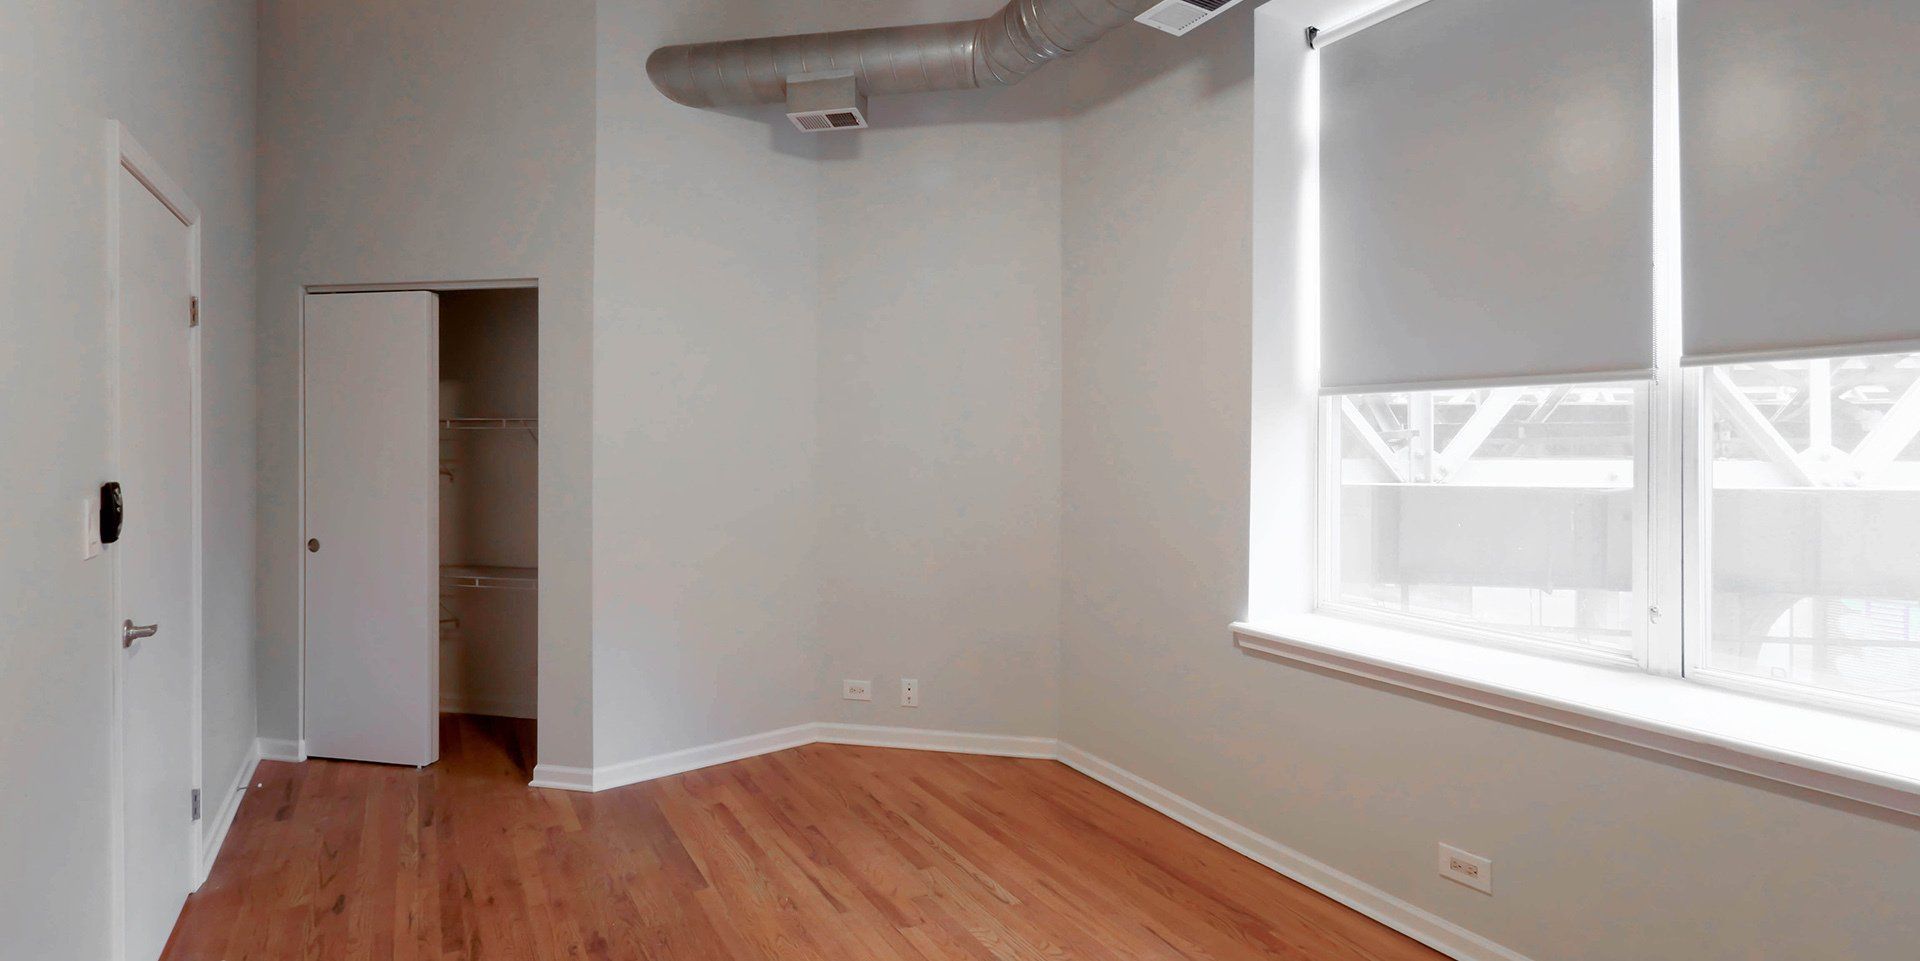 An empty room with hardwood floors and a large window at 1550 North Damen.